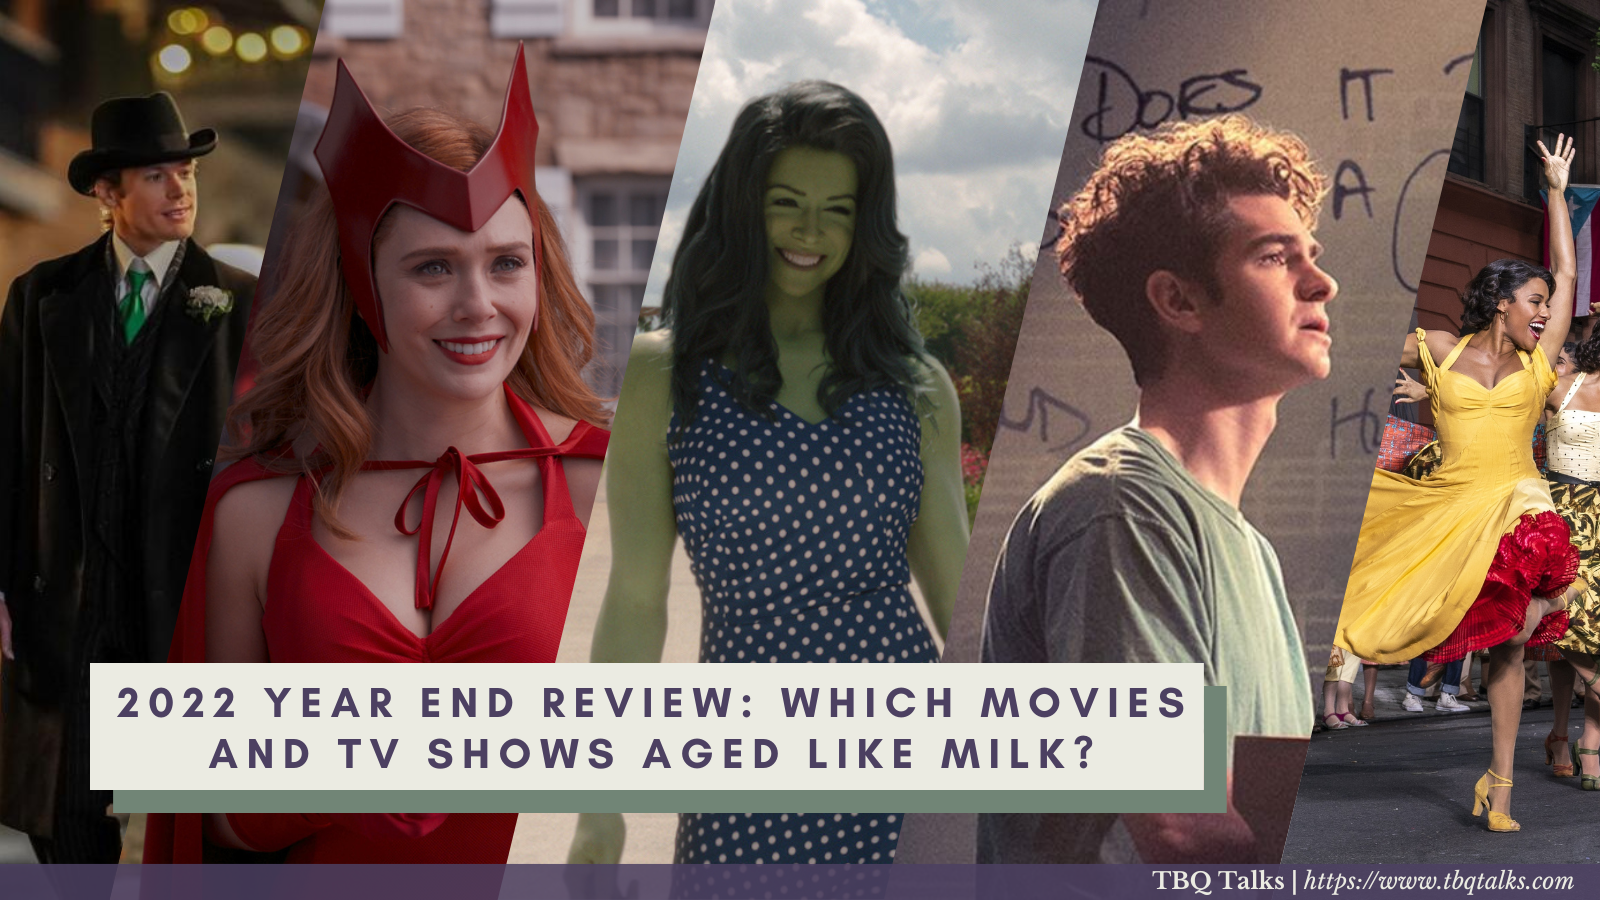 2022 Year End Review: Which Movies and TV Shows Aged Like Milk?